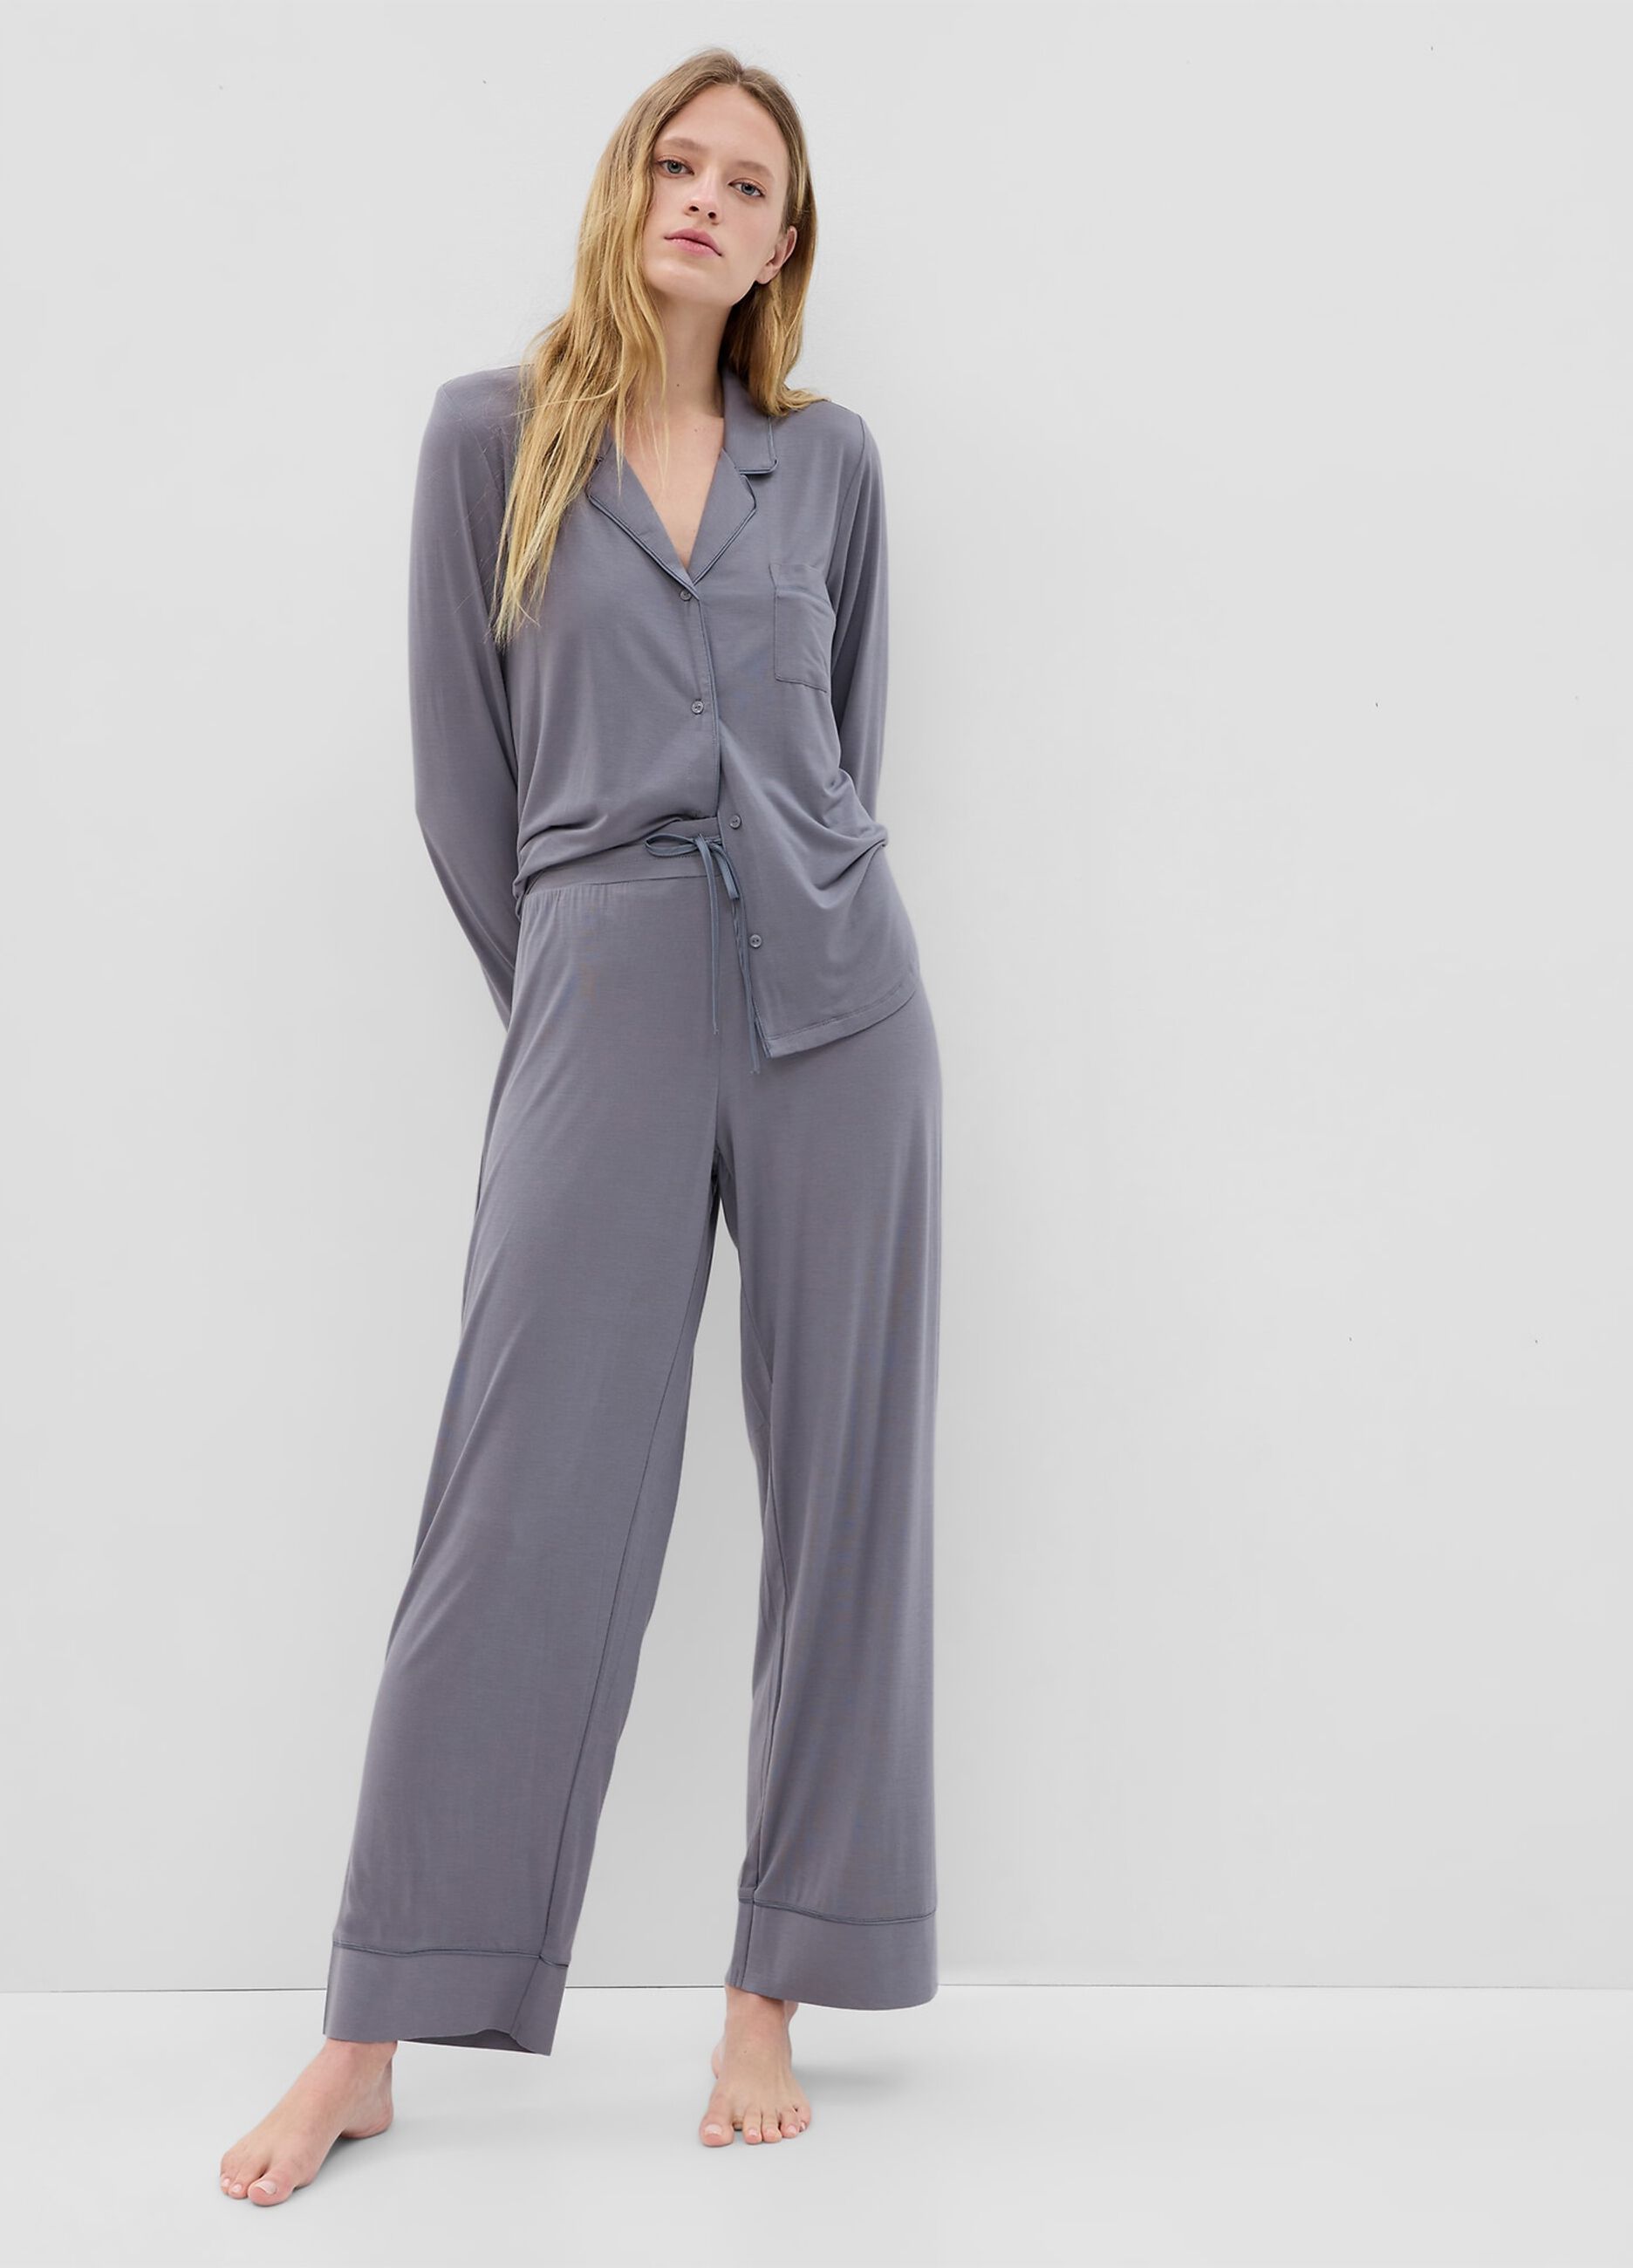 Full-length pyjama bottoms with contrasting piping